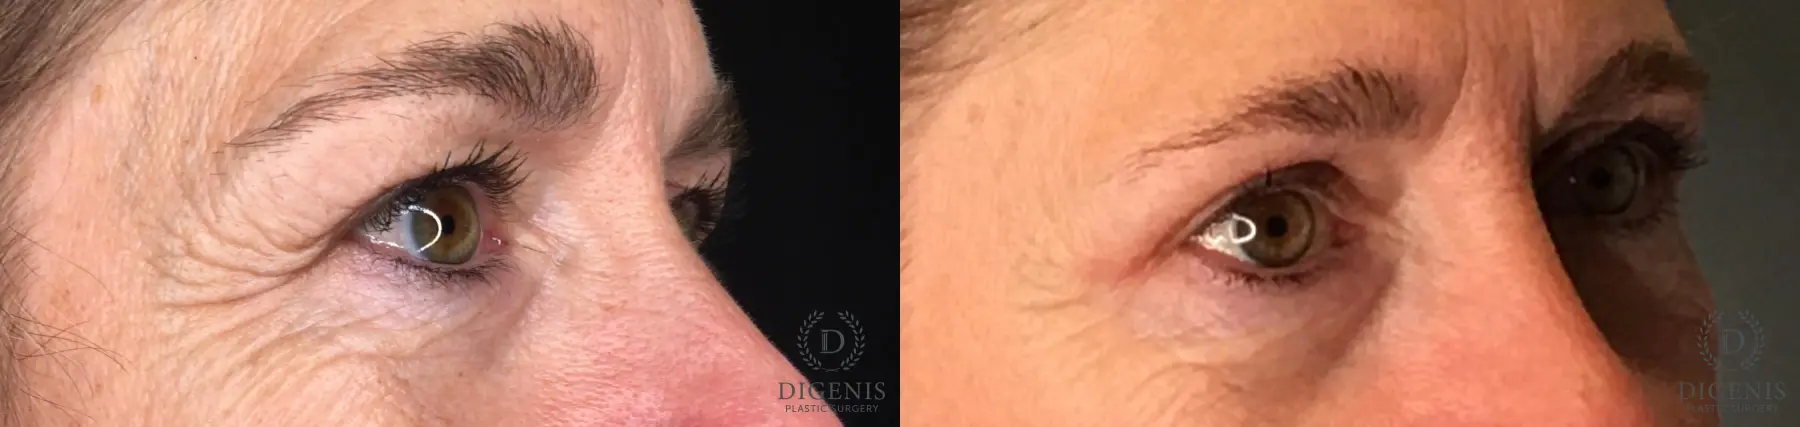 Blepharoplasty: Patient 6 - Before and After 4